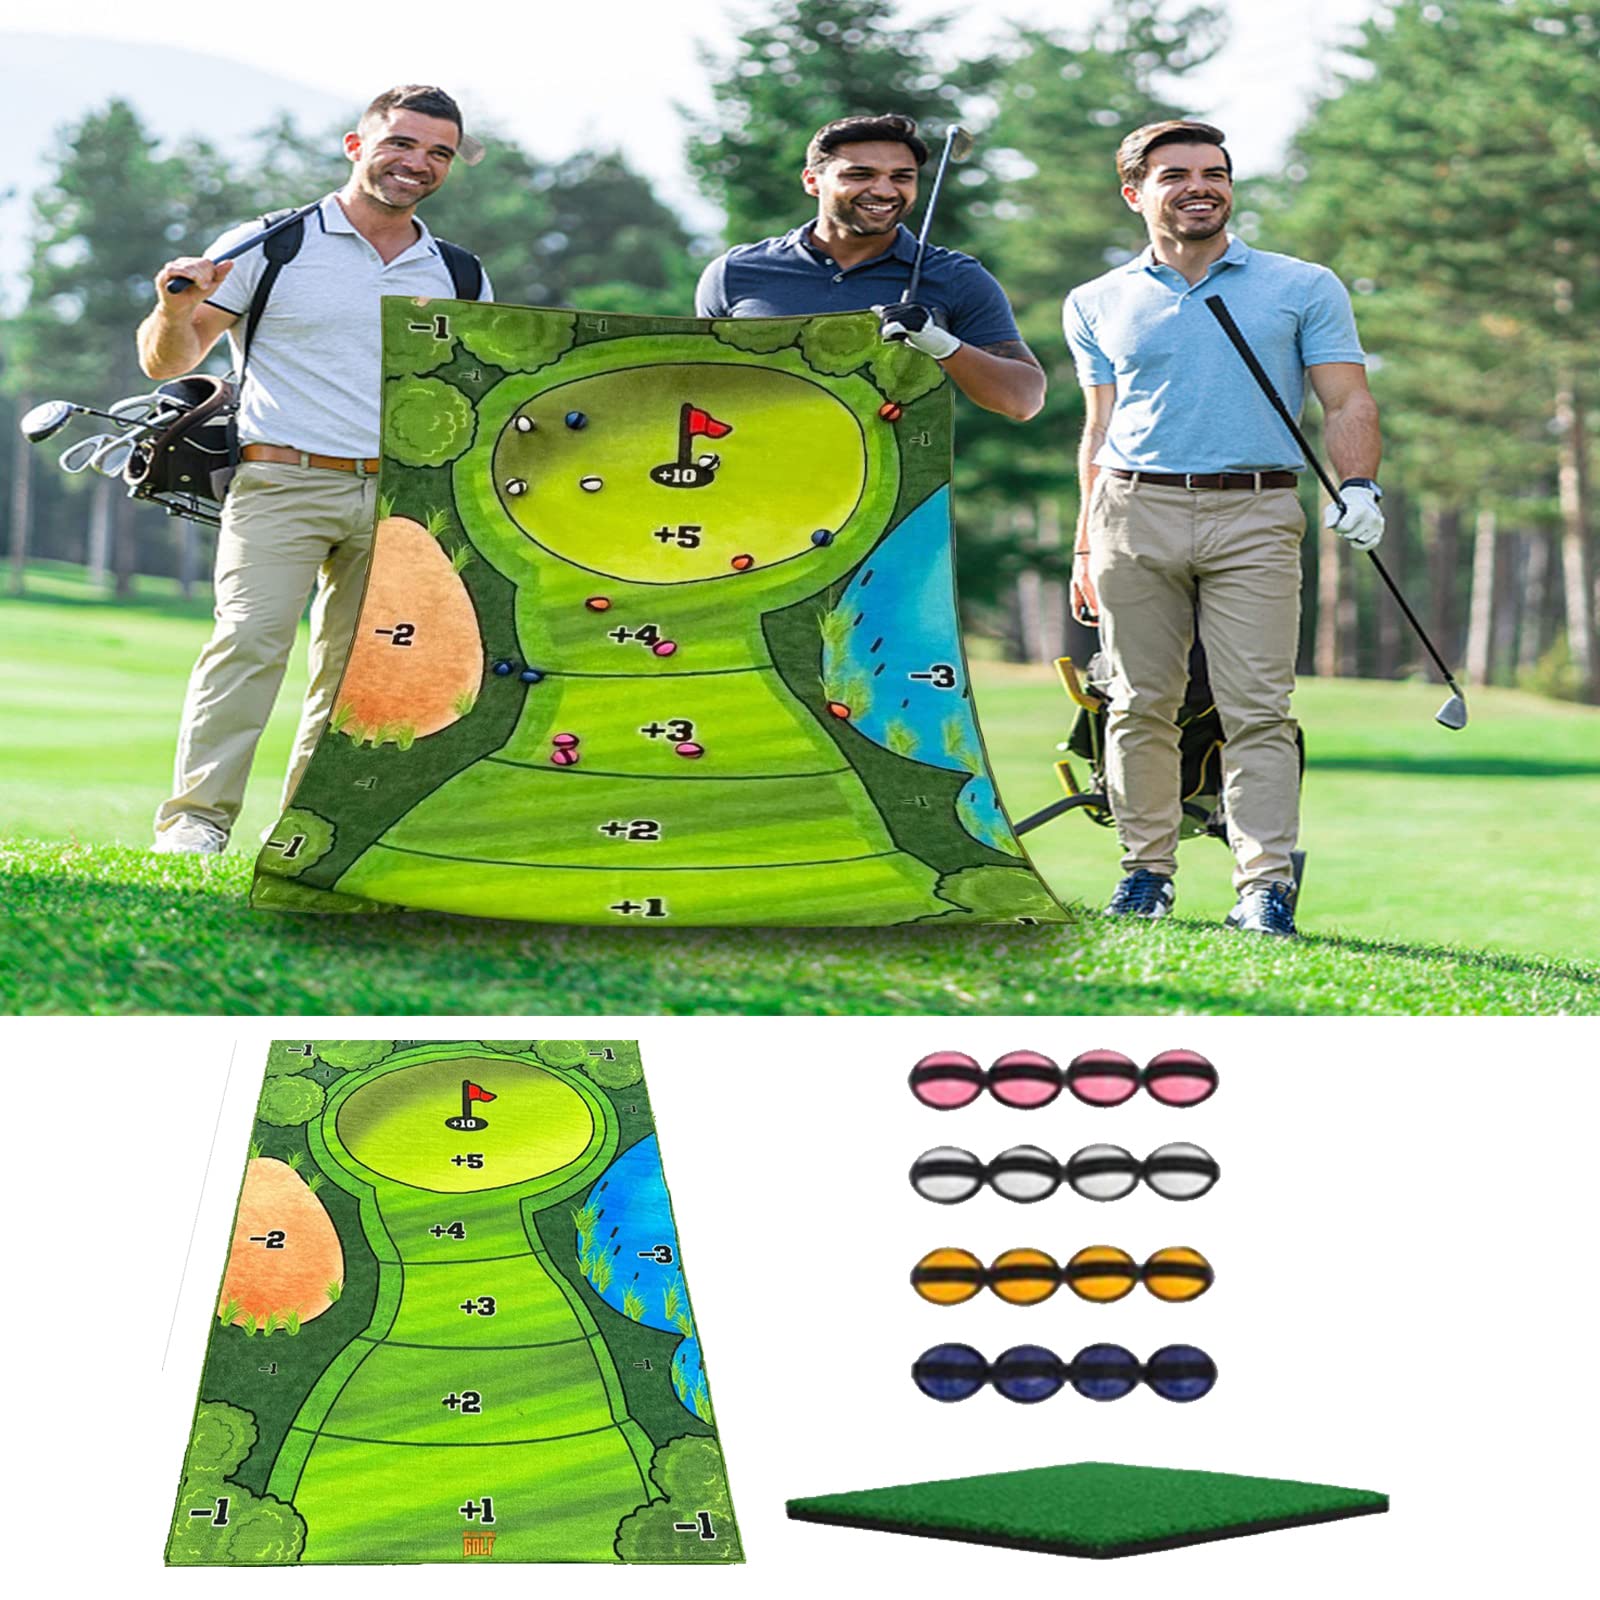 Casual Golf Game Set,Battle Royale Golf Game,Golf Hitting Mats,Golf Game,Golf Putting Indoor Set Golf Training Aid Equipment,The Royale Golf Set for Parties BBQs (120×180cm)